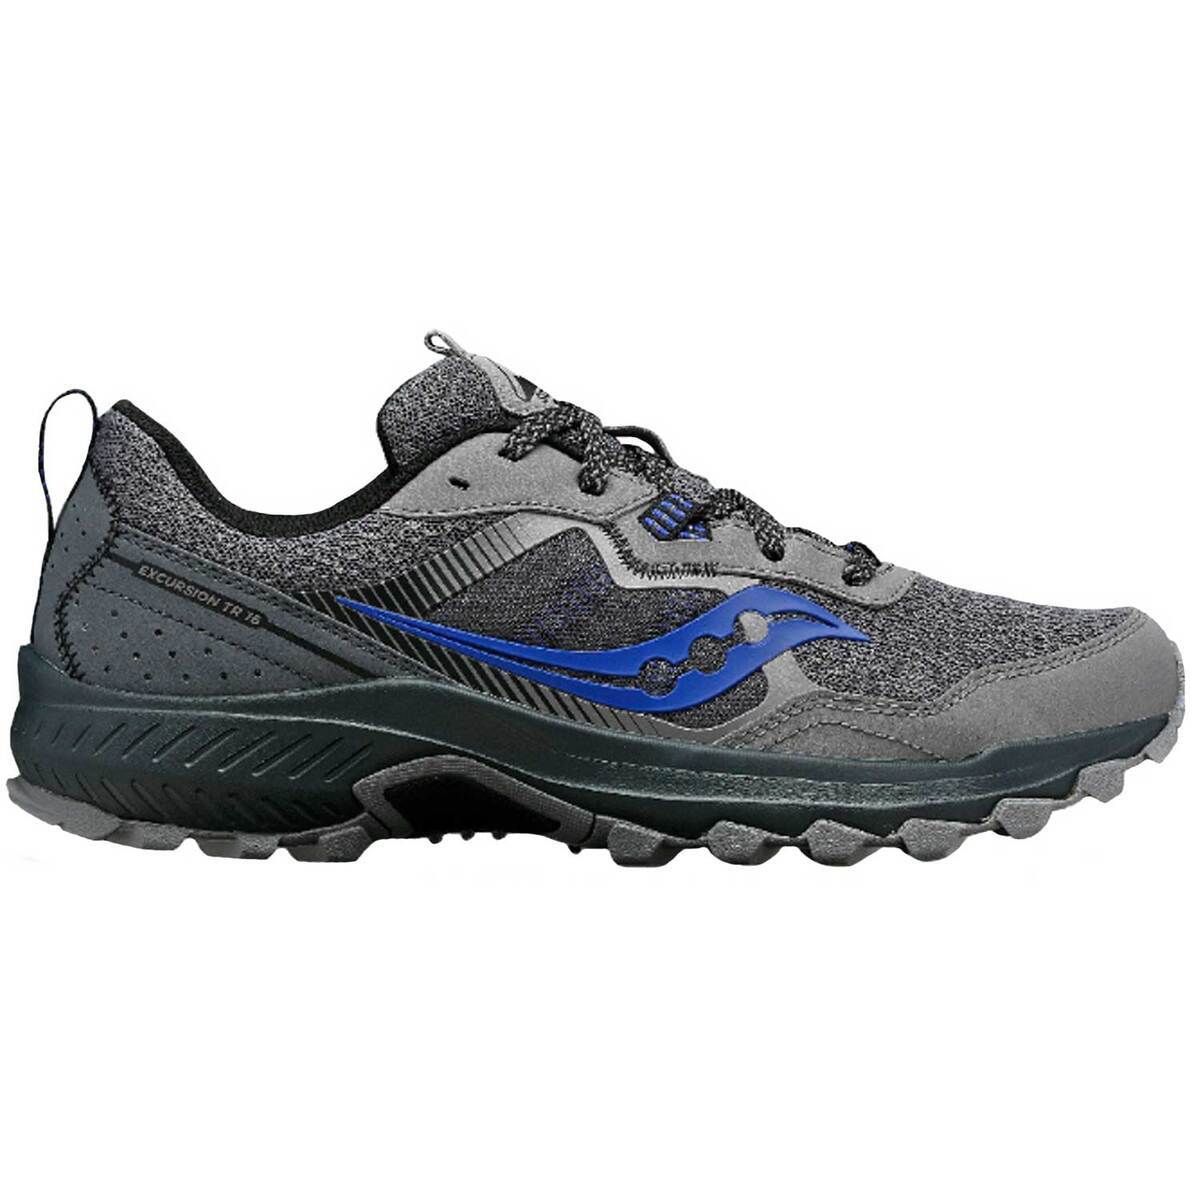 Saucony Men's Excursion TR16 Trail Running Shoes | Sportsman's Warehouse